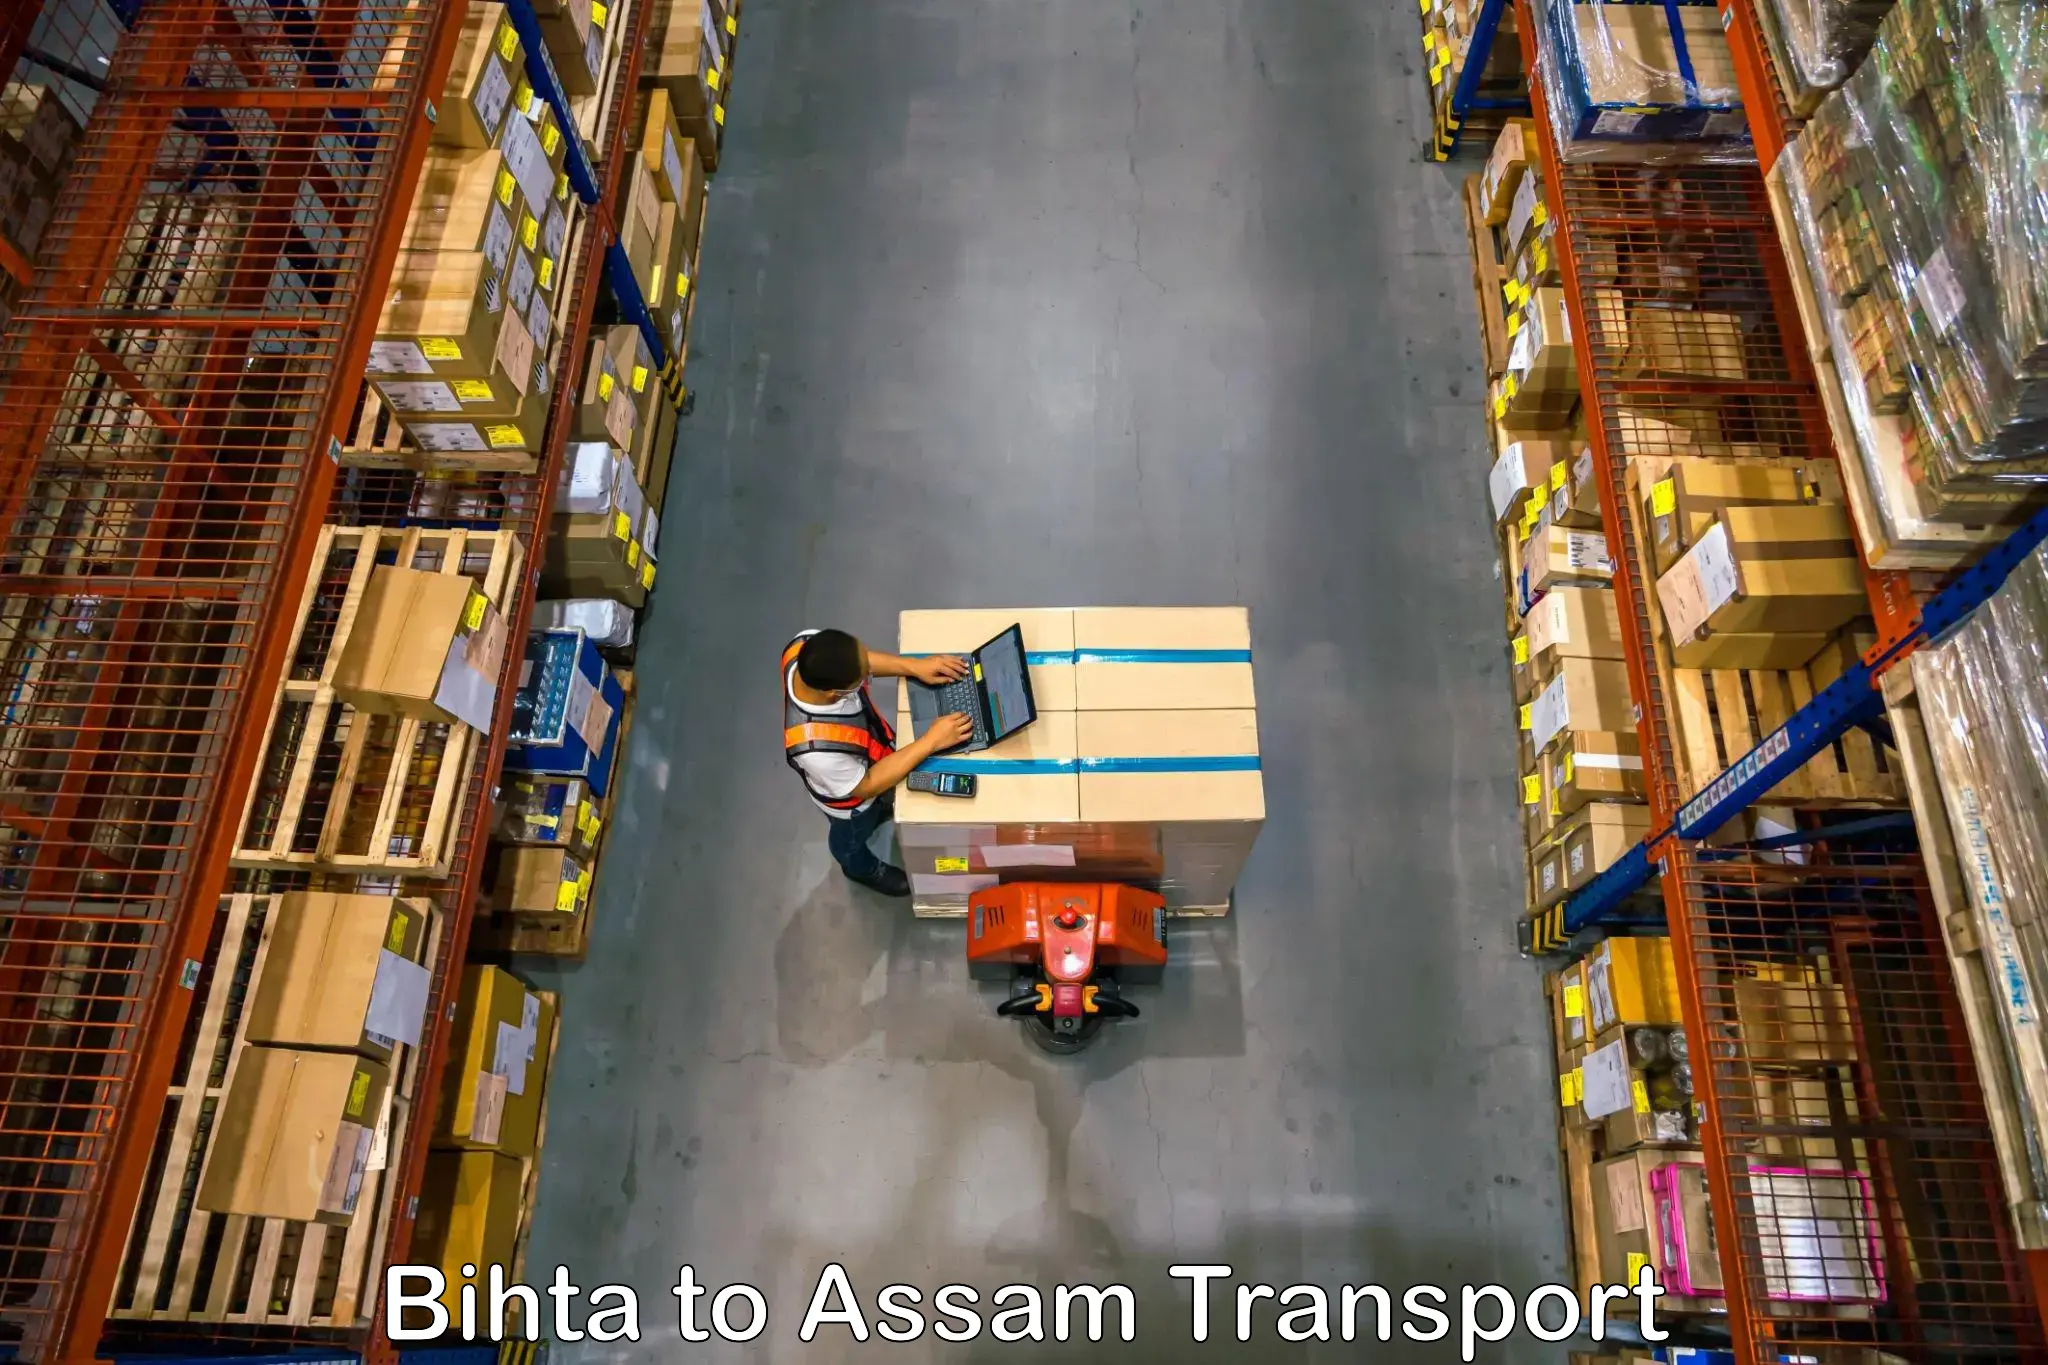 Transport bike from one state to another Bihta to Morigaon